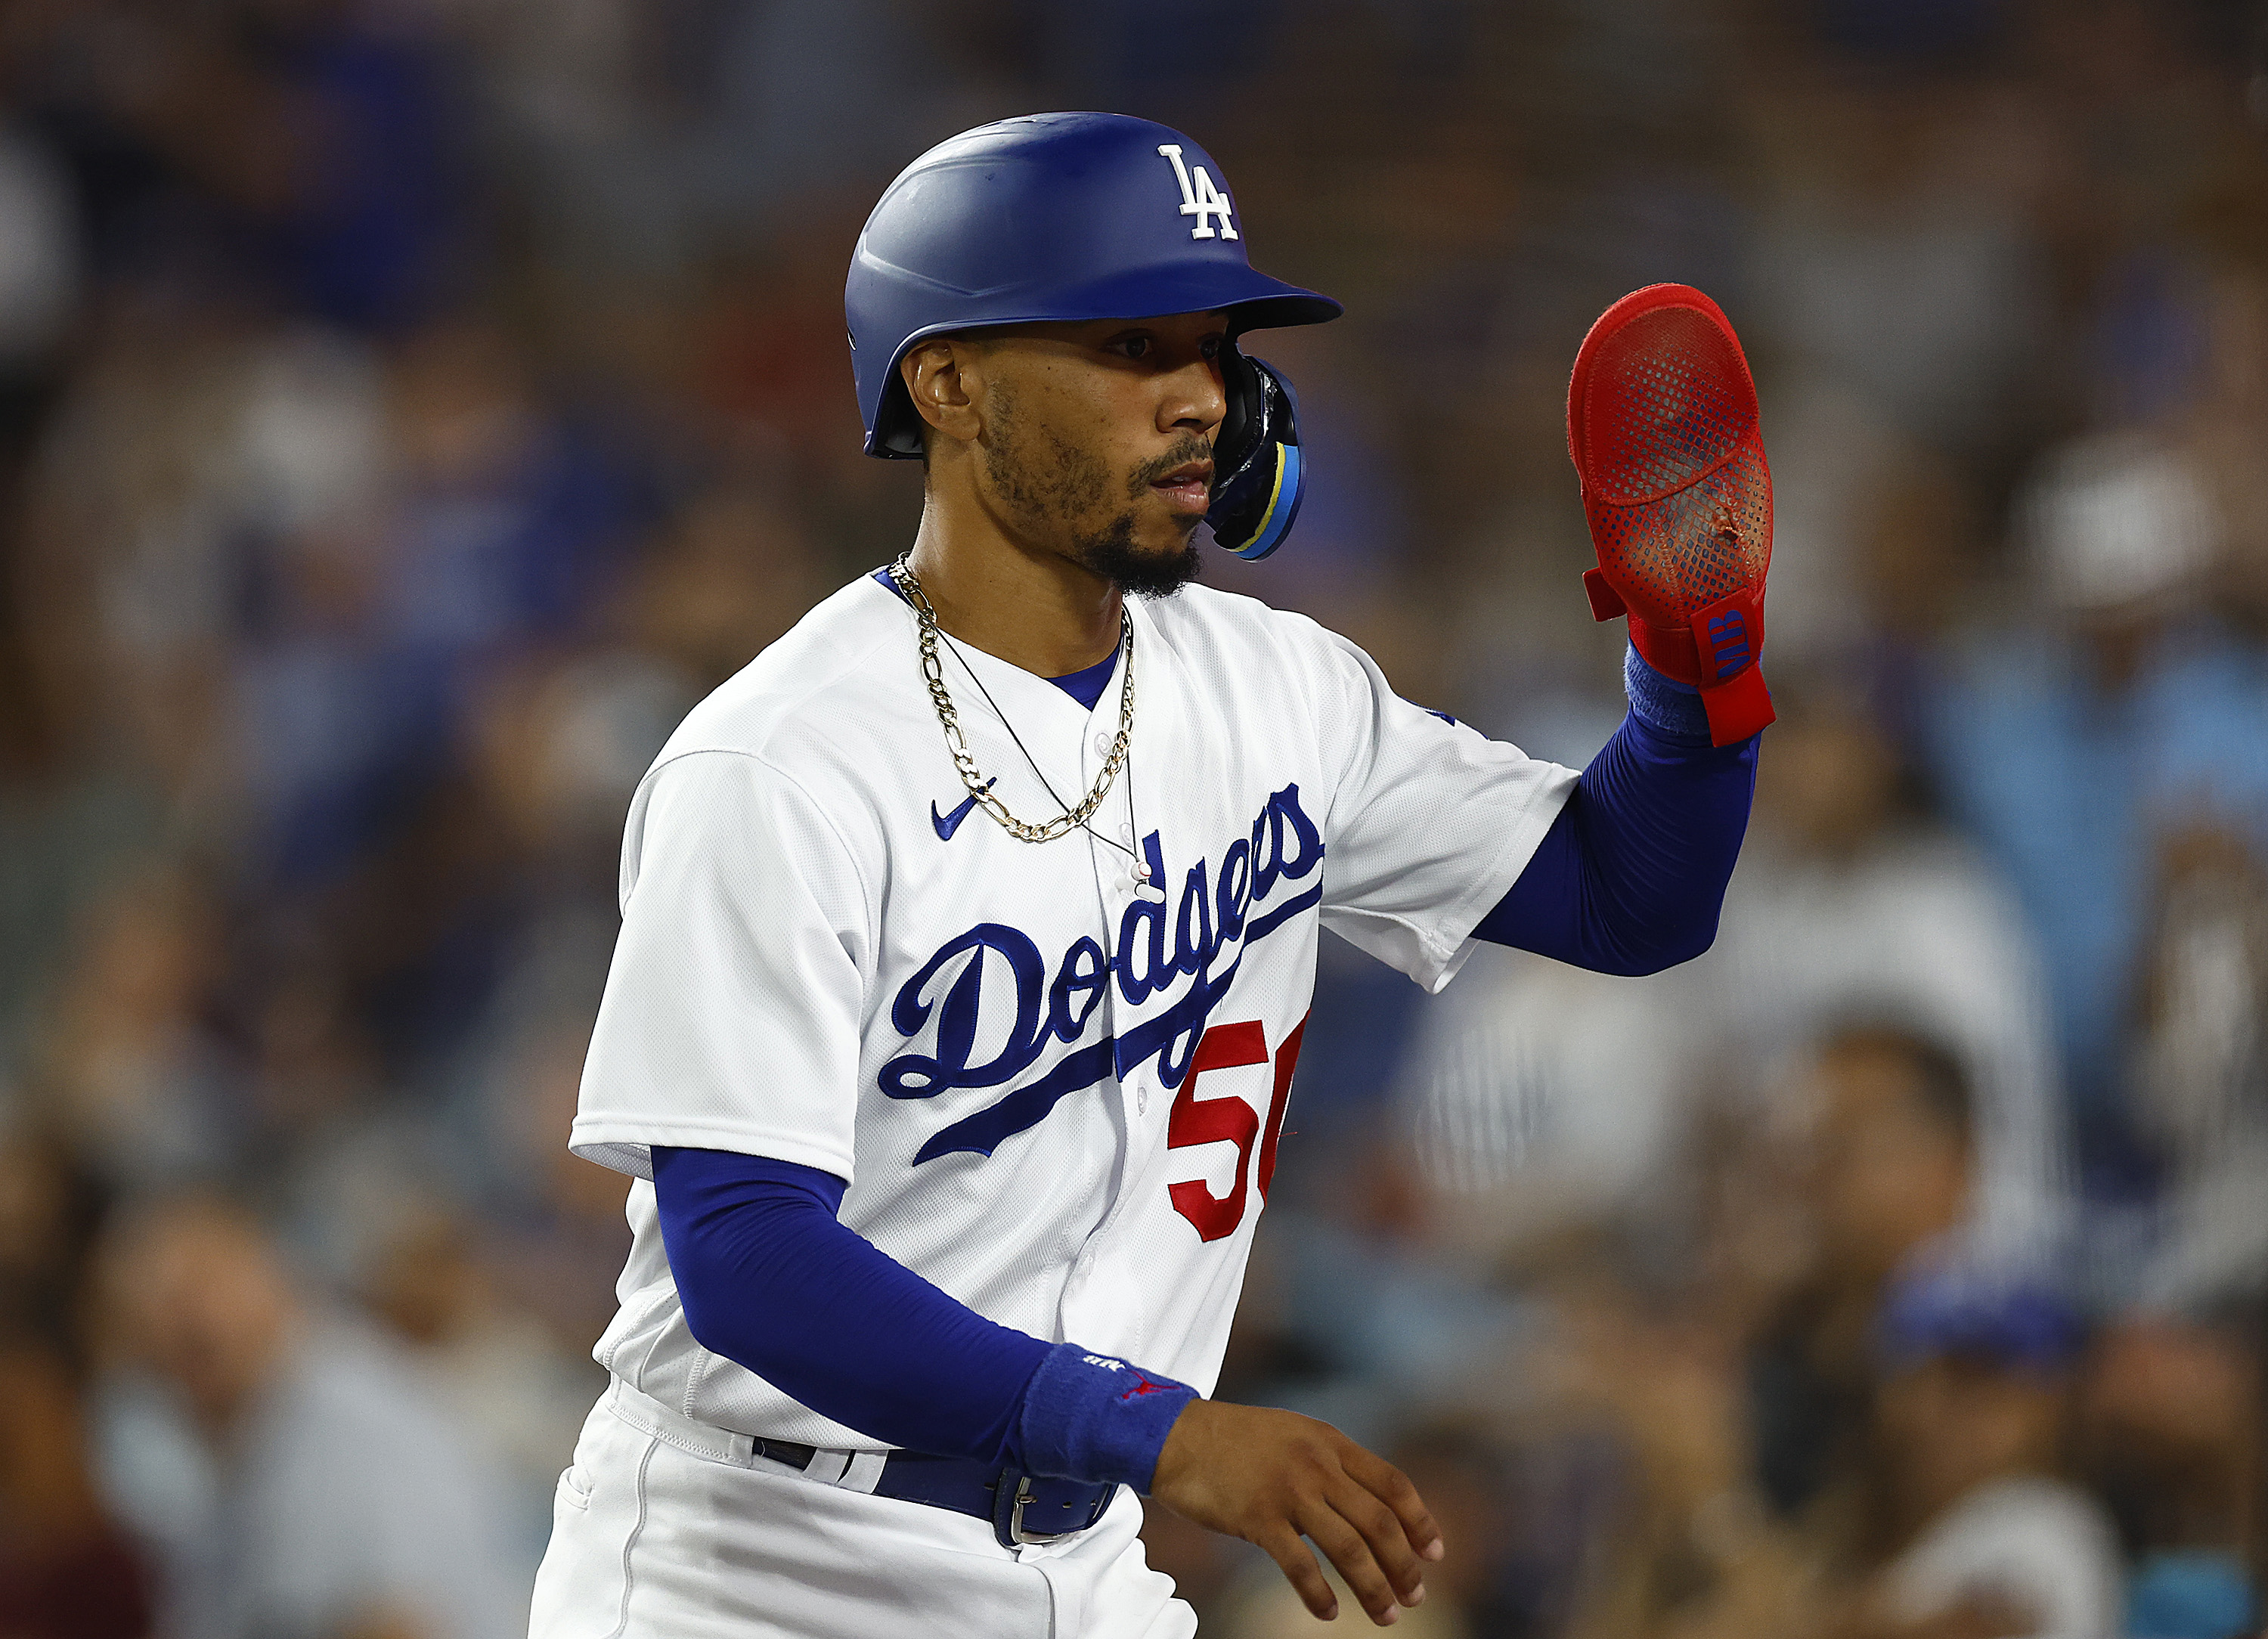 Fantasy baseball busts 2021: Breaking down three OF to avoid in